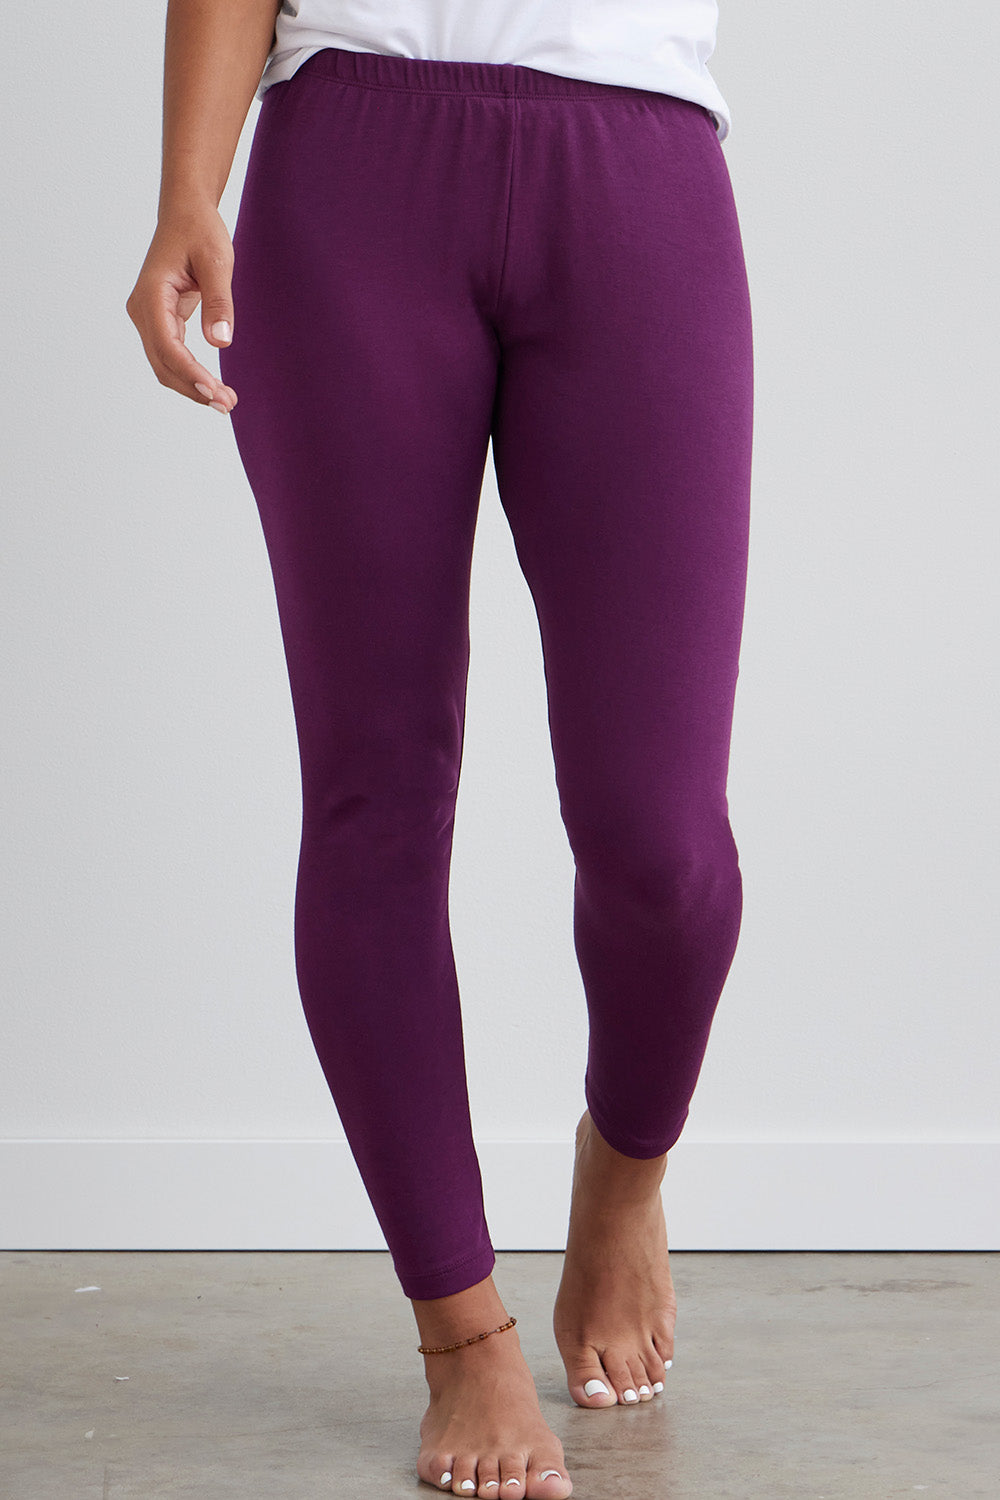 Buy Plain Pure 100% Summer Lycra Leggings With combo of 5 colors